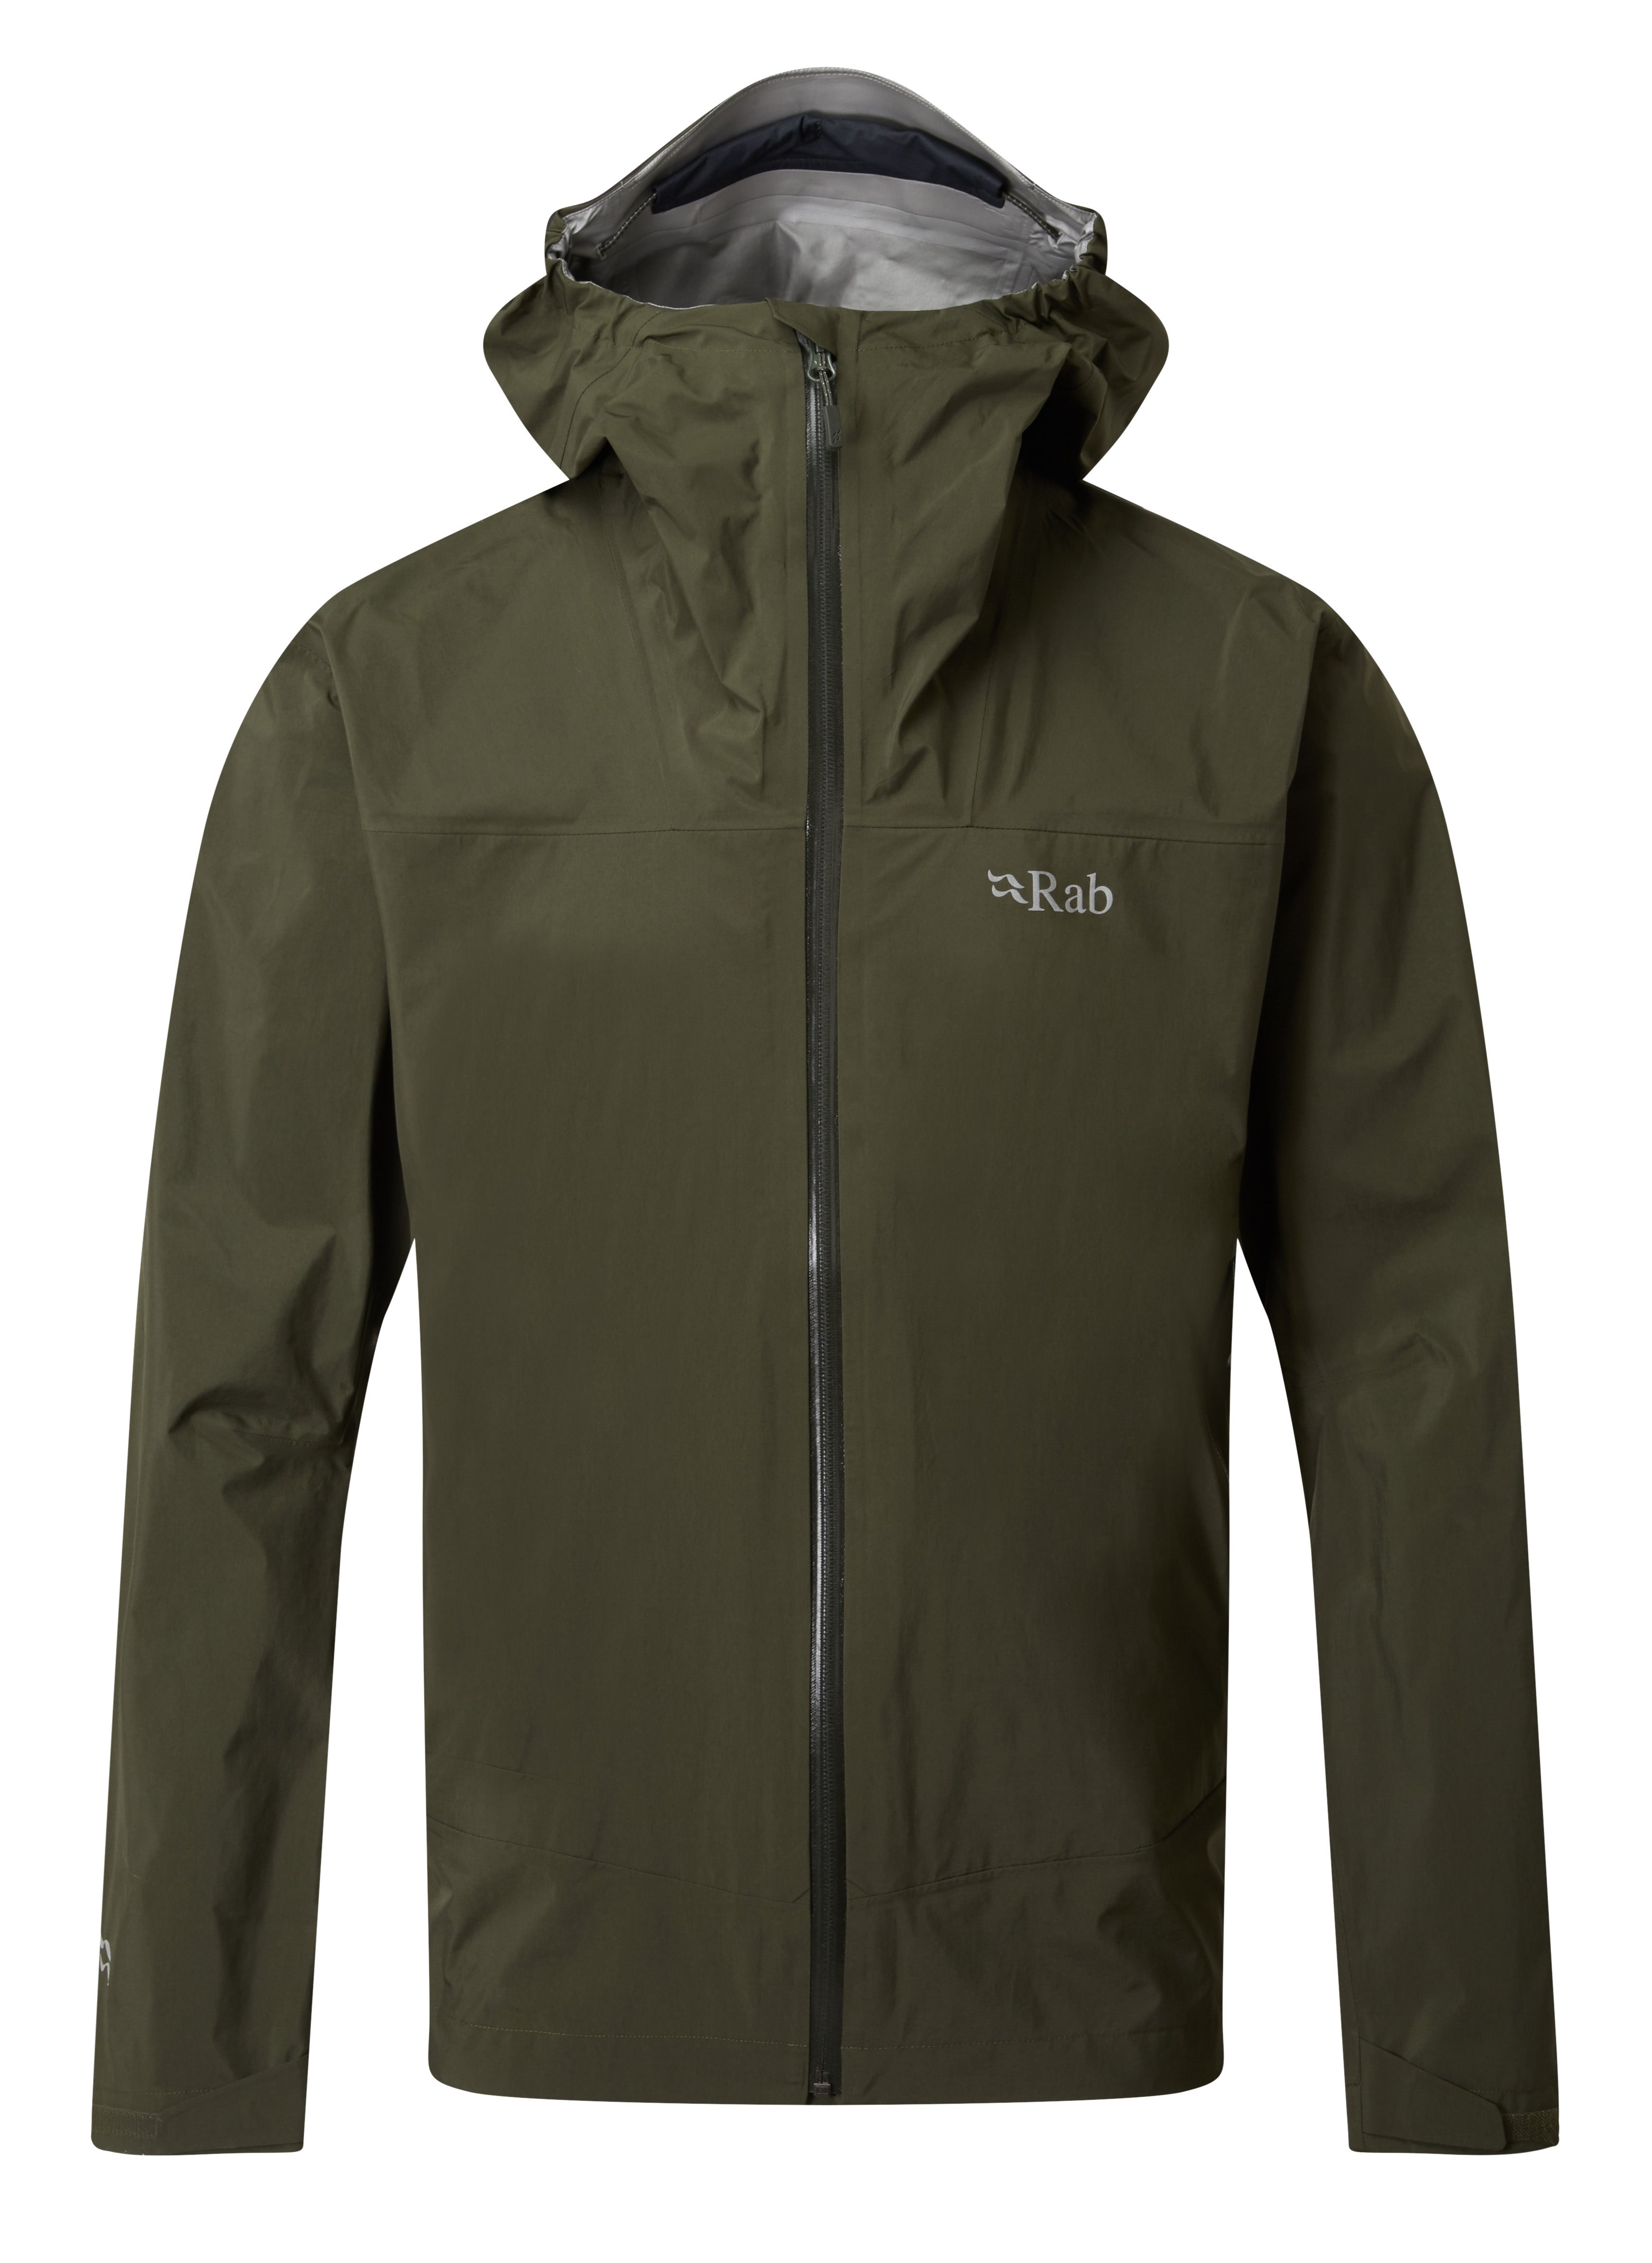 Rab Men's Meridian Gore-TEX Jacket - Outfitters Store